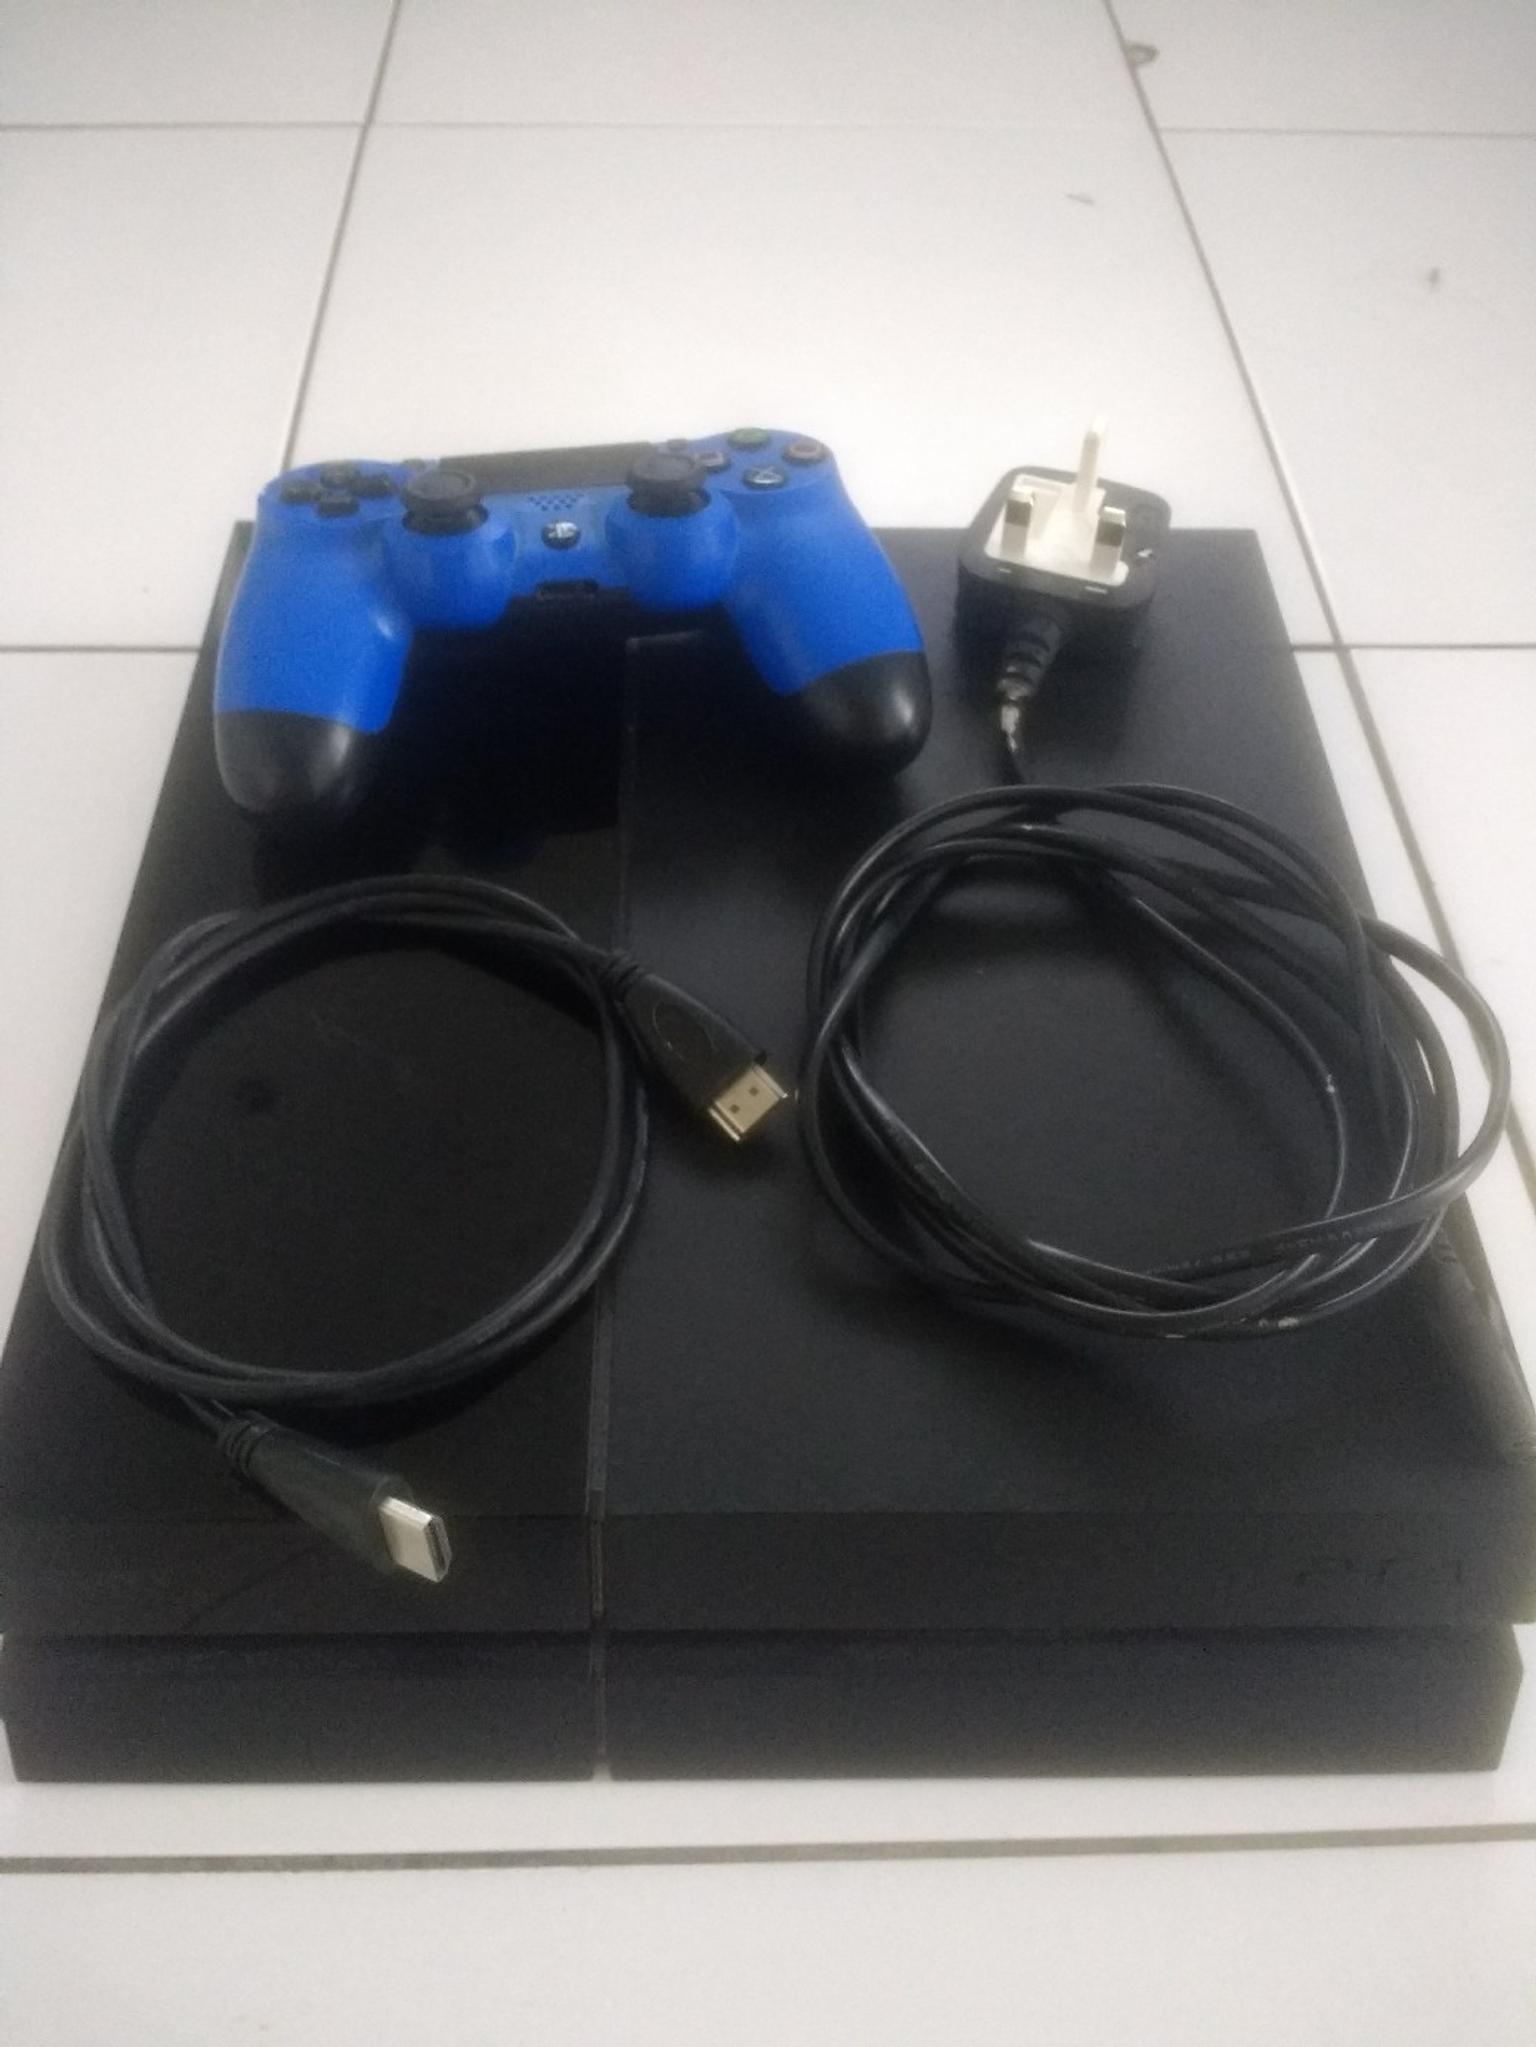 2nd hand playstation 4